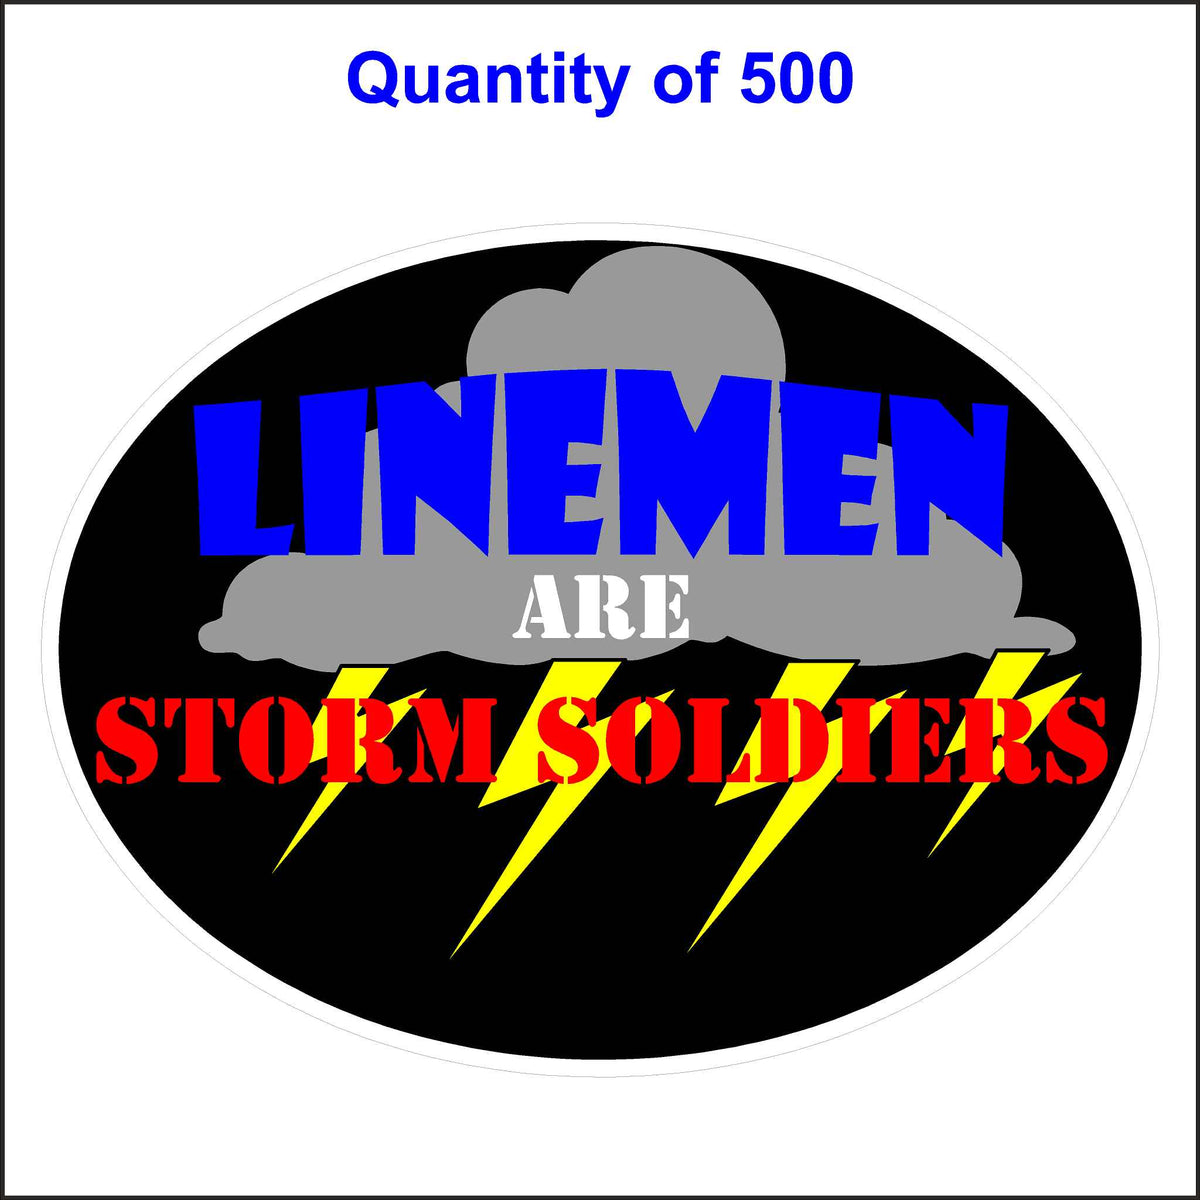 Black Lineman Are Storm Soldiers Stickers. 500 Quantity.